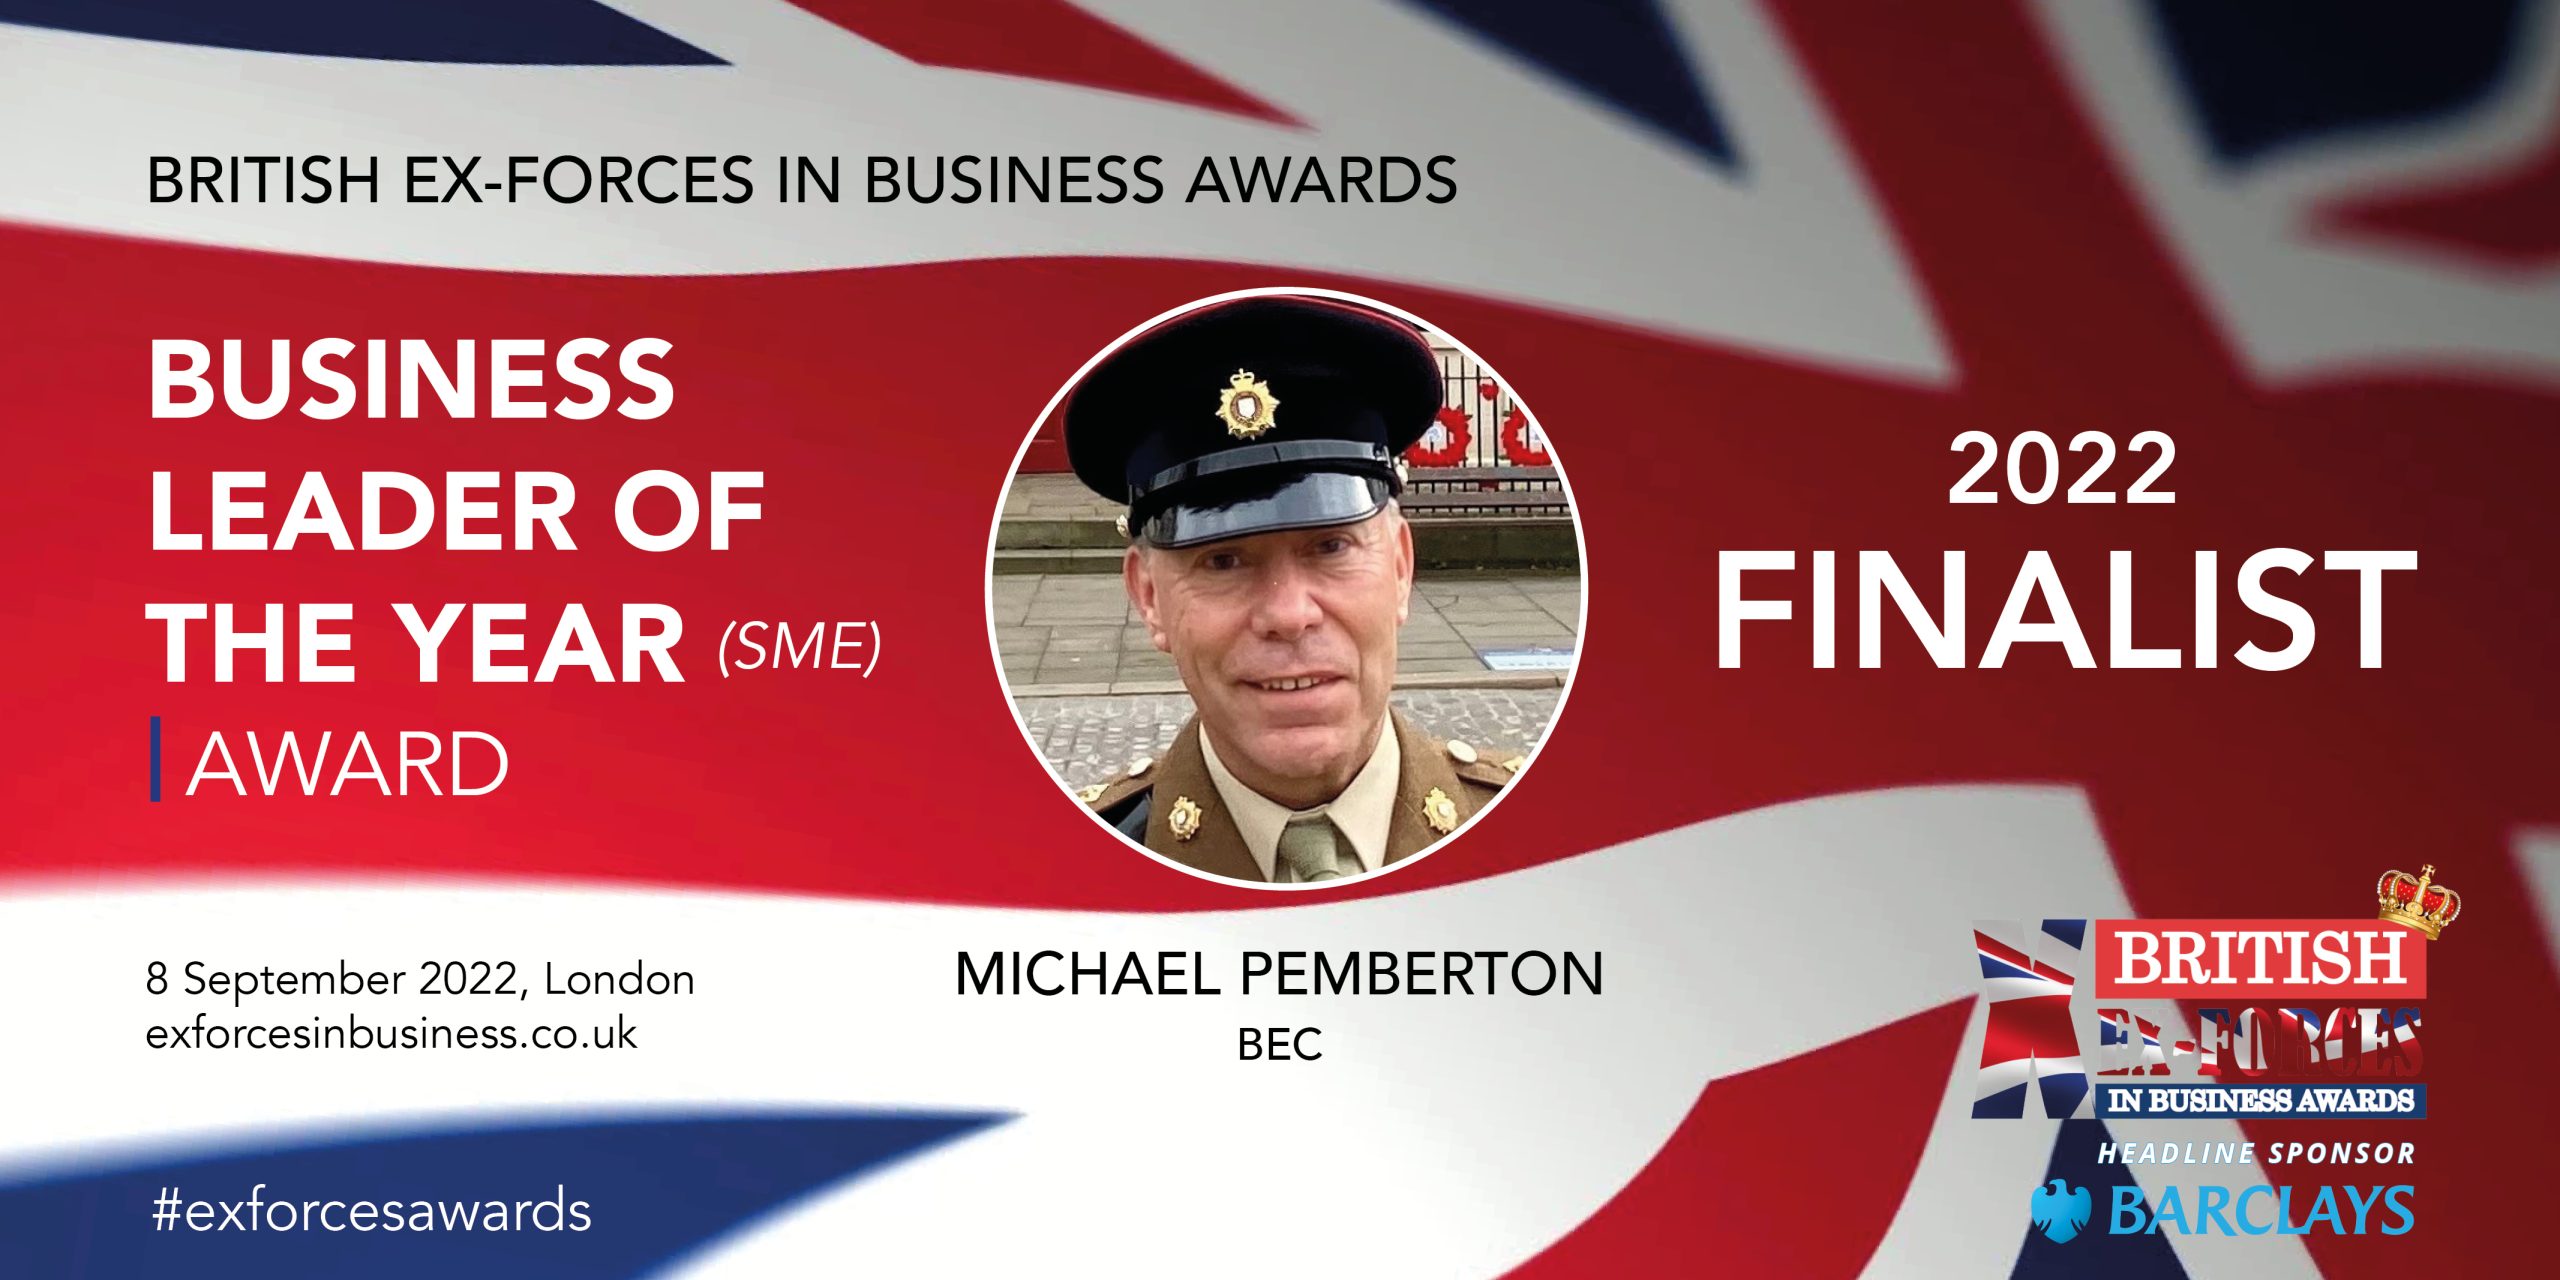 Our CEO Michael Pemberton is among the finalists in the British Ex-Forces in Business Awards 2022